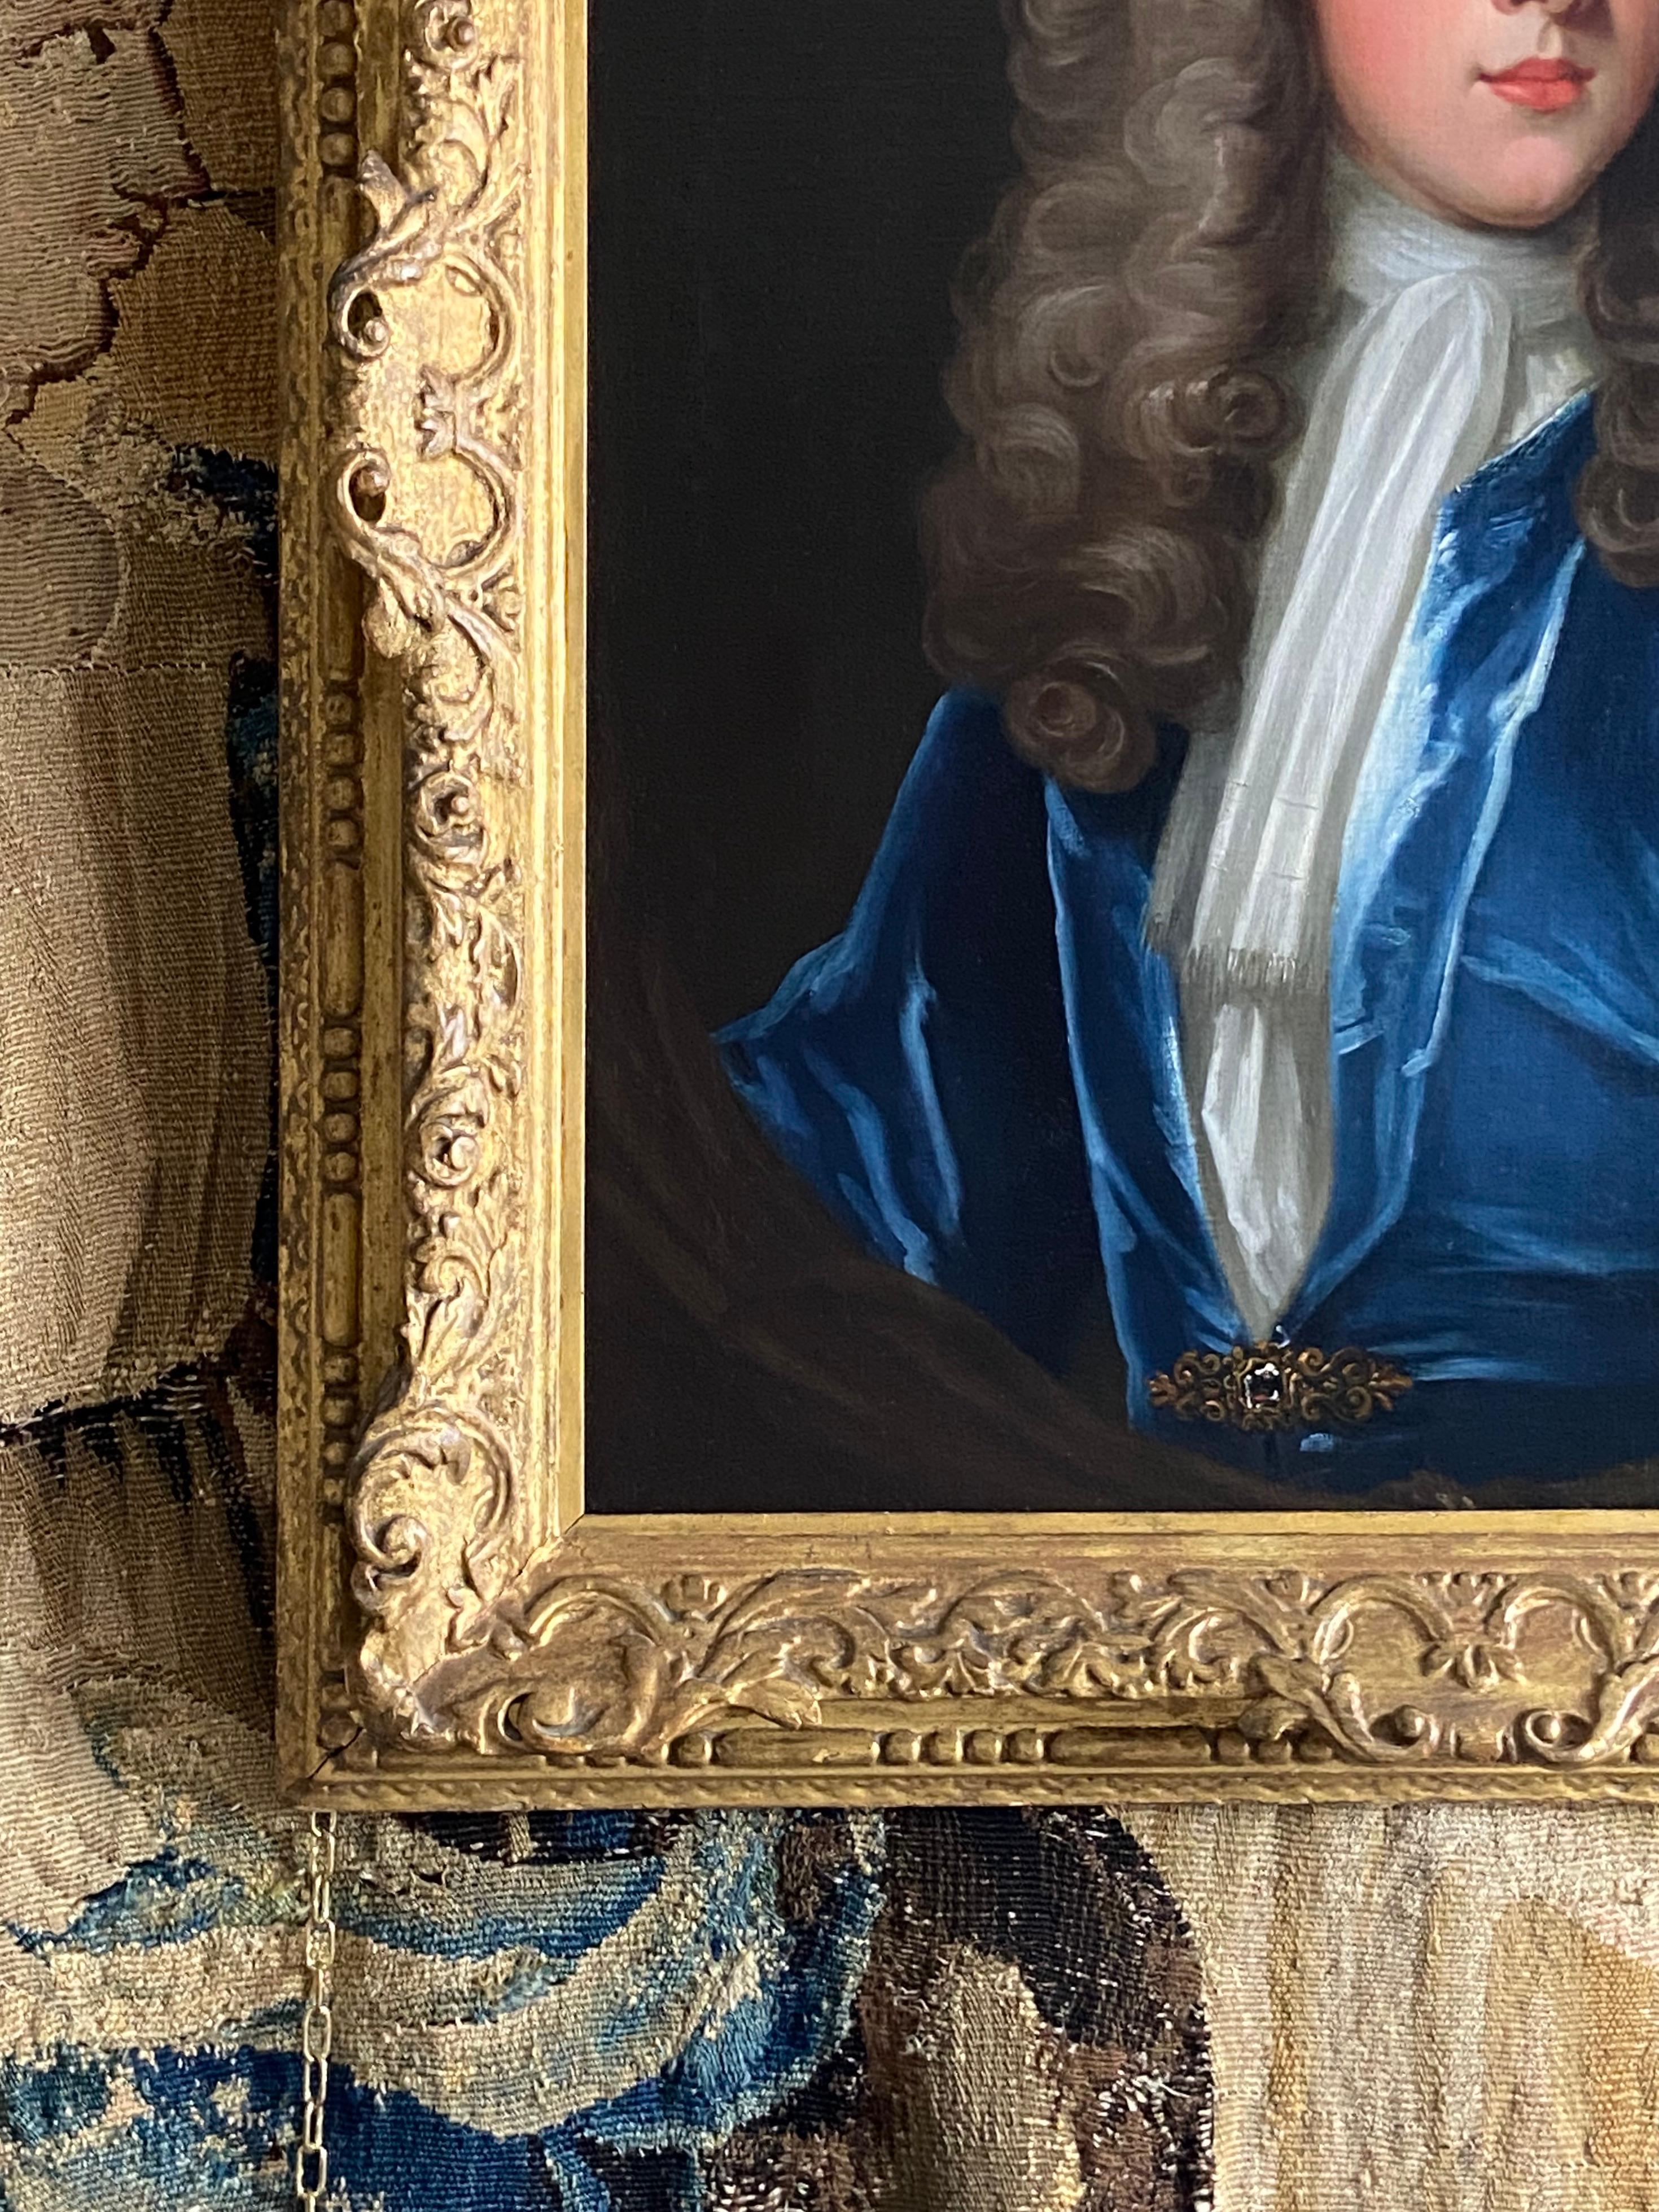 18TH CENTURY ENGLISH OIL PORTRAIT OF A YOUNG GENTLEMAN IN A BLUE VELVET COAT 1